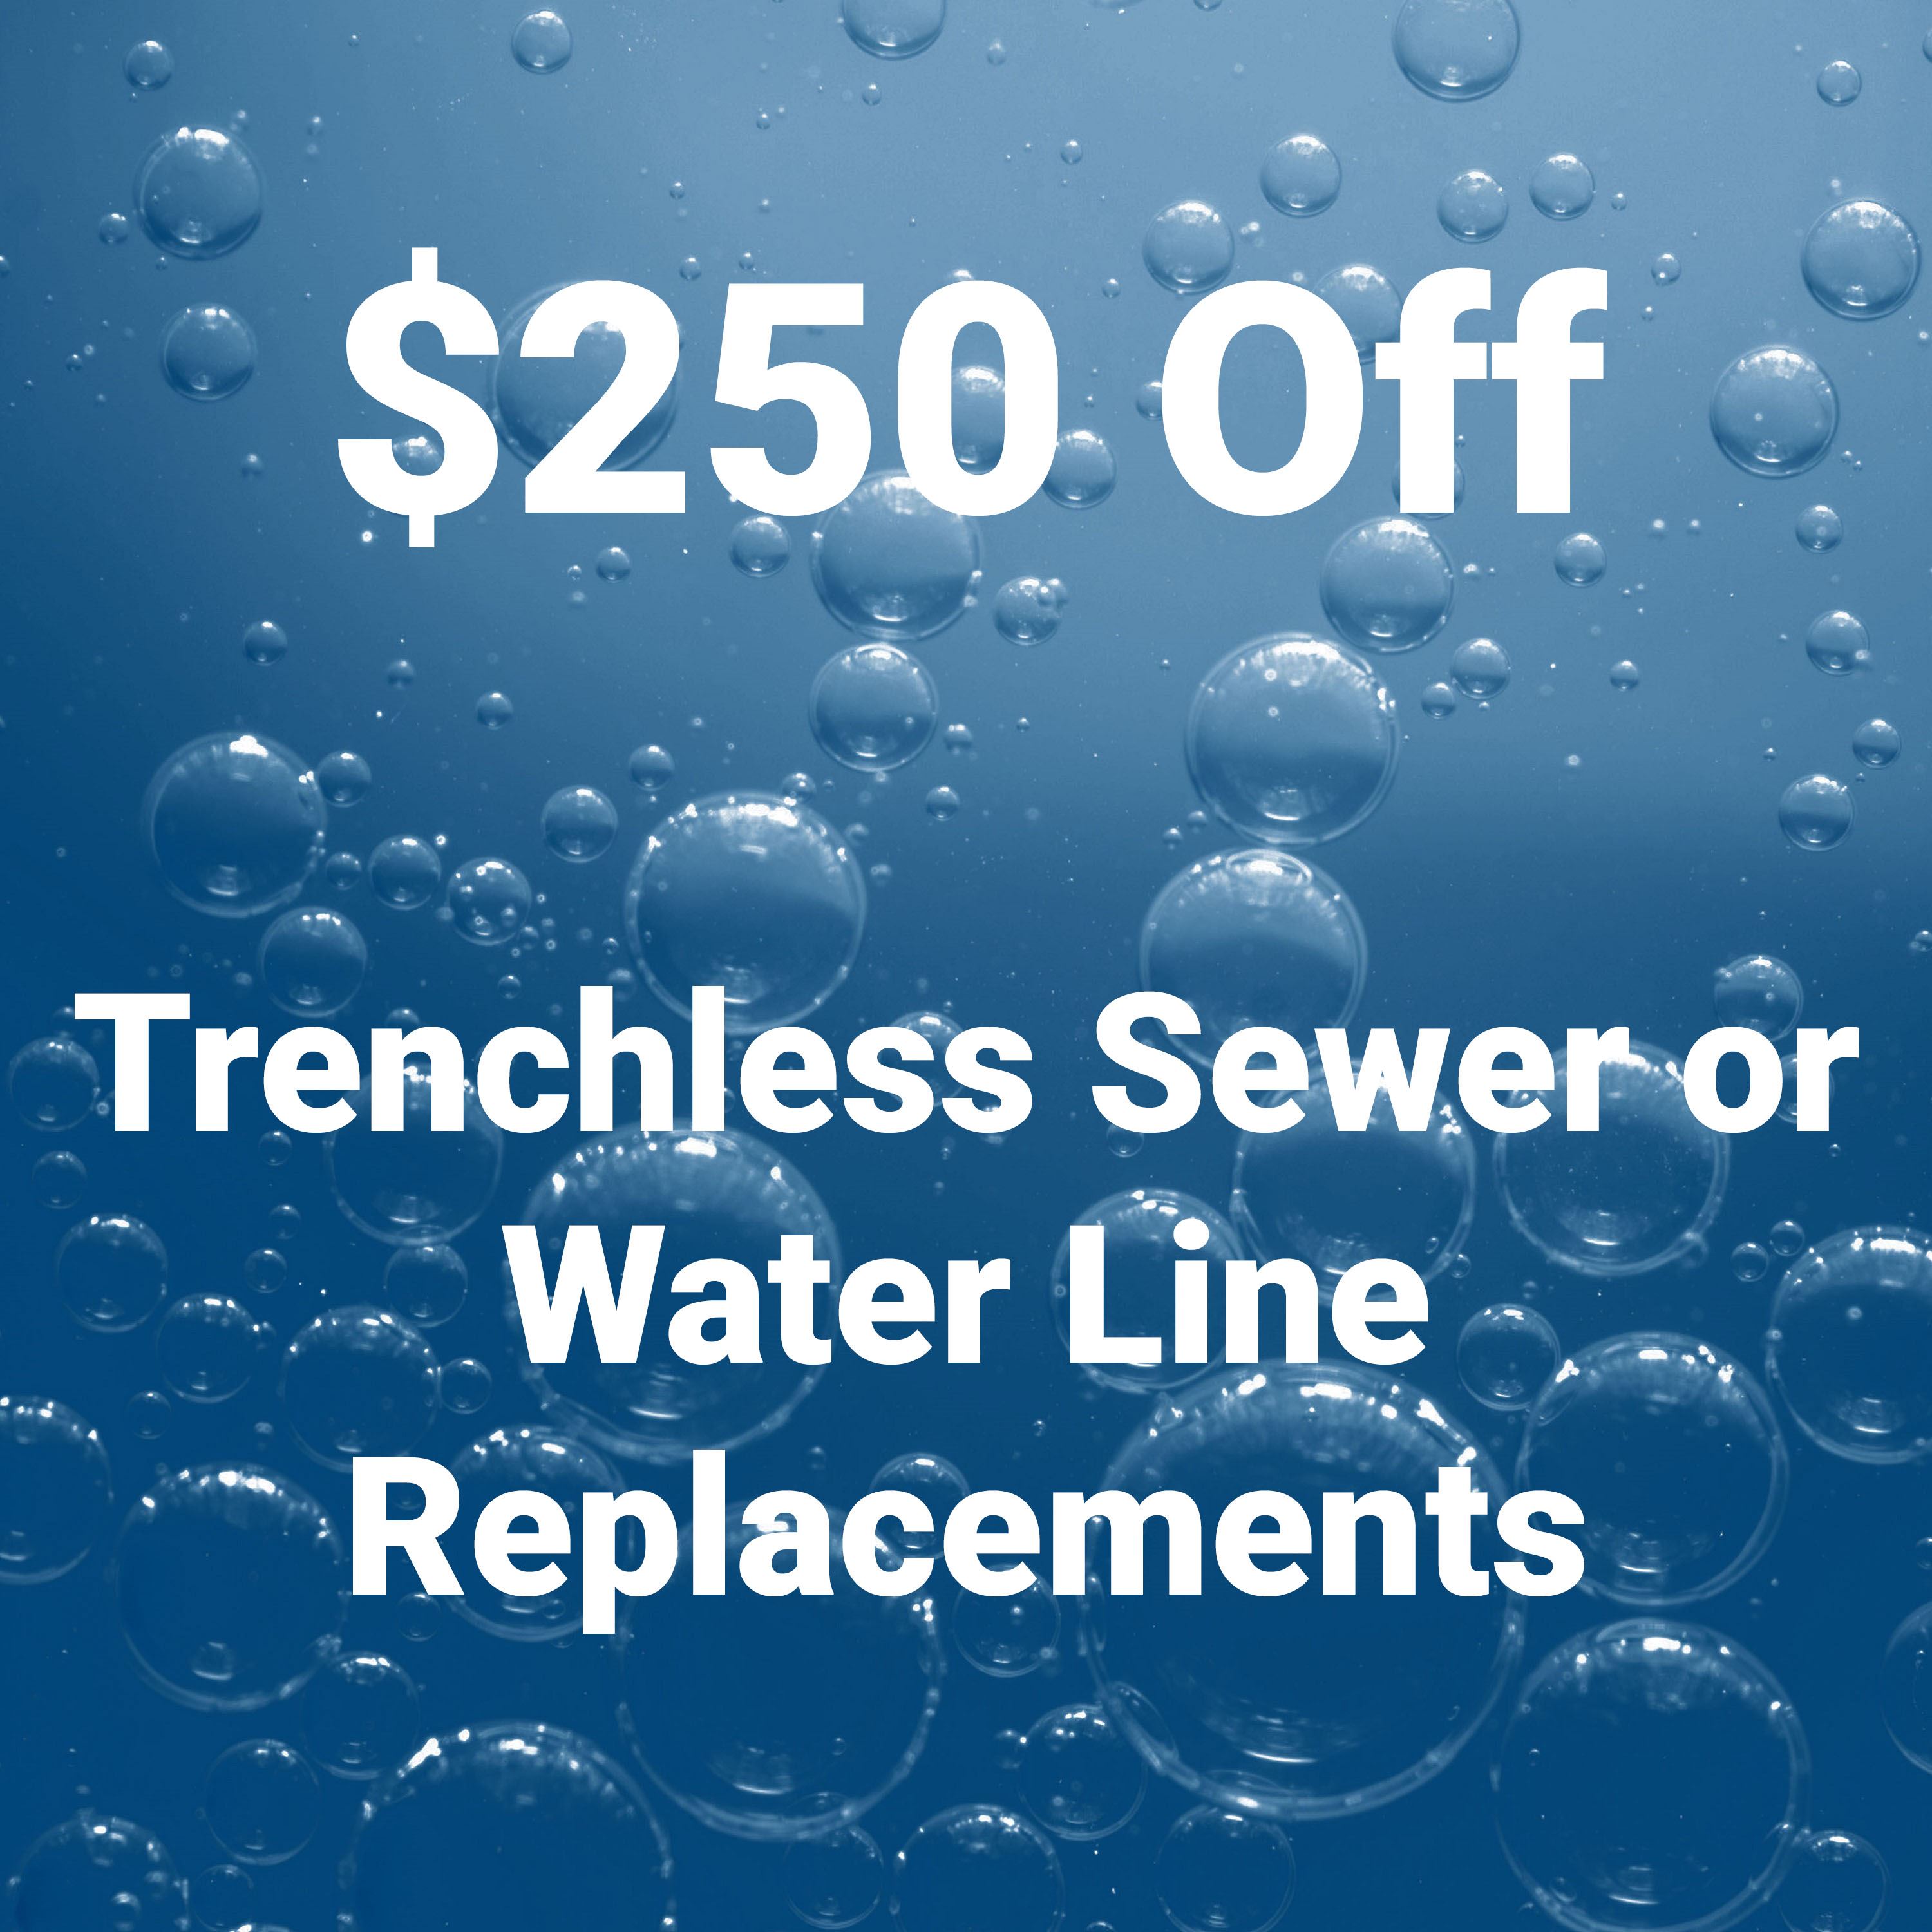 Coupon offer: Bubbling water image with text that reads $250 Off Trenchless Sewer or Water Line Replacements